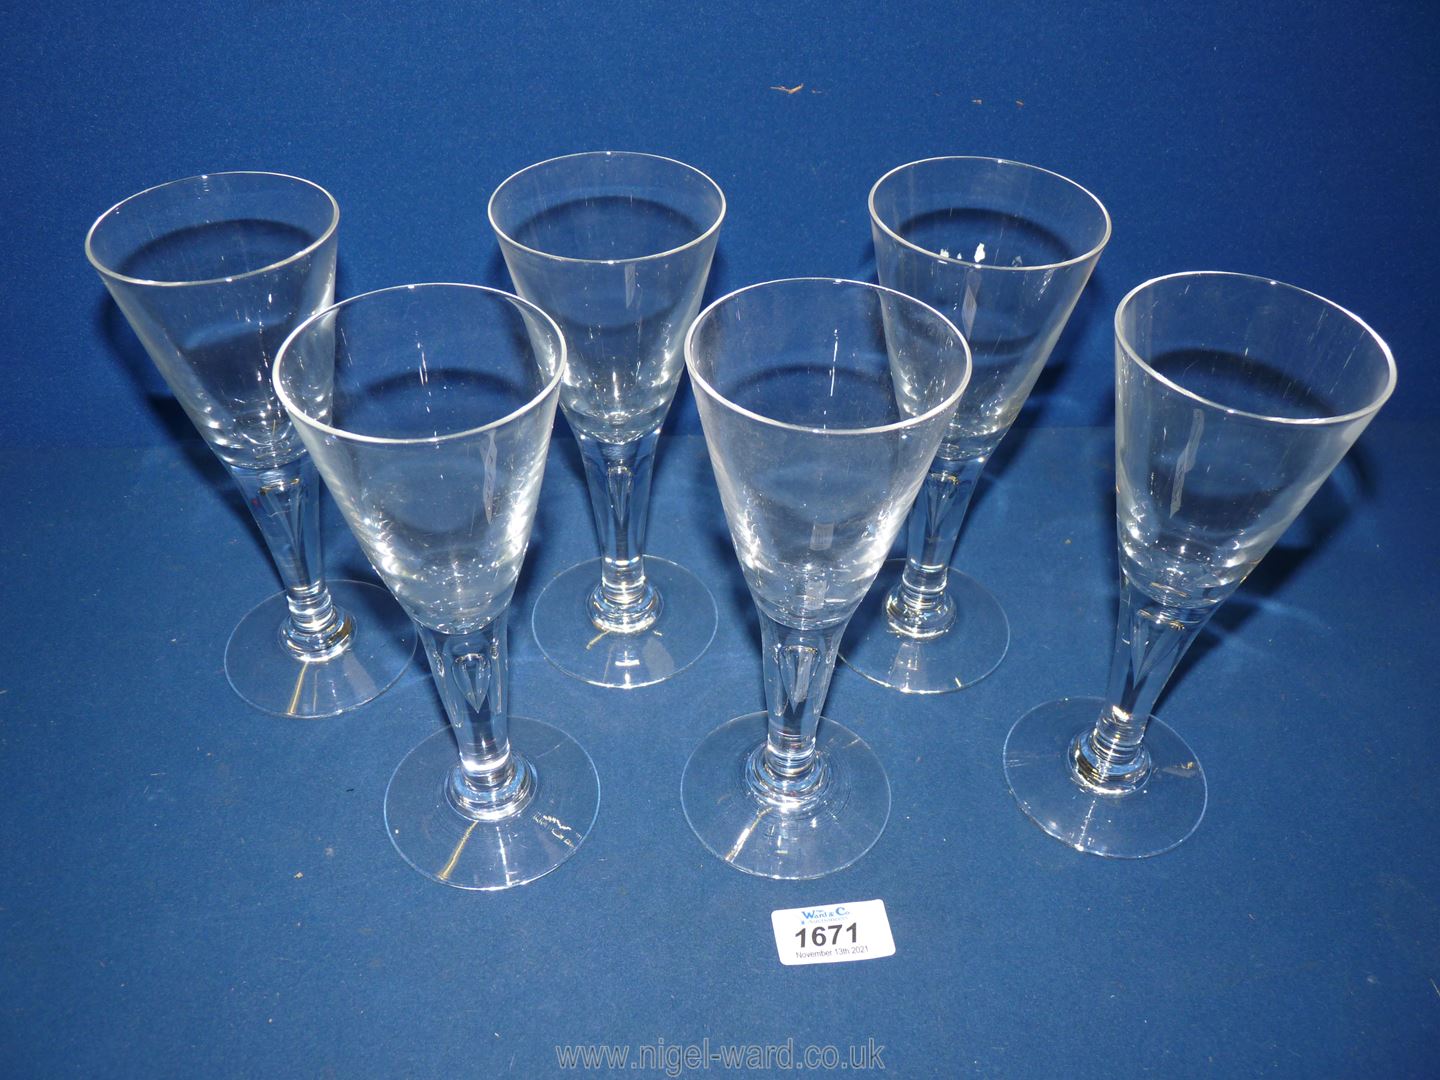 Six funnel shaped wine glasses with teardrop detail within the stems.